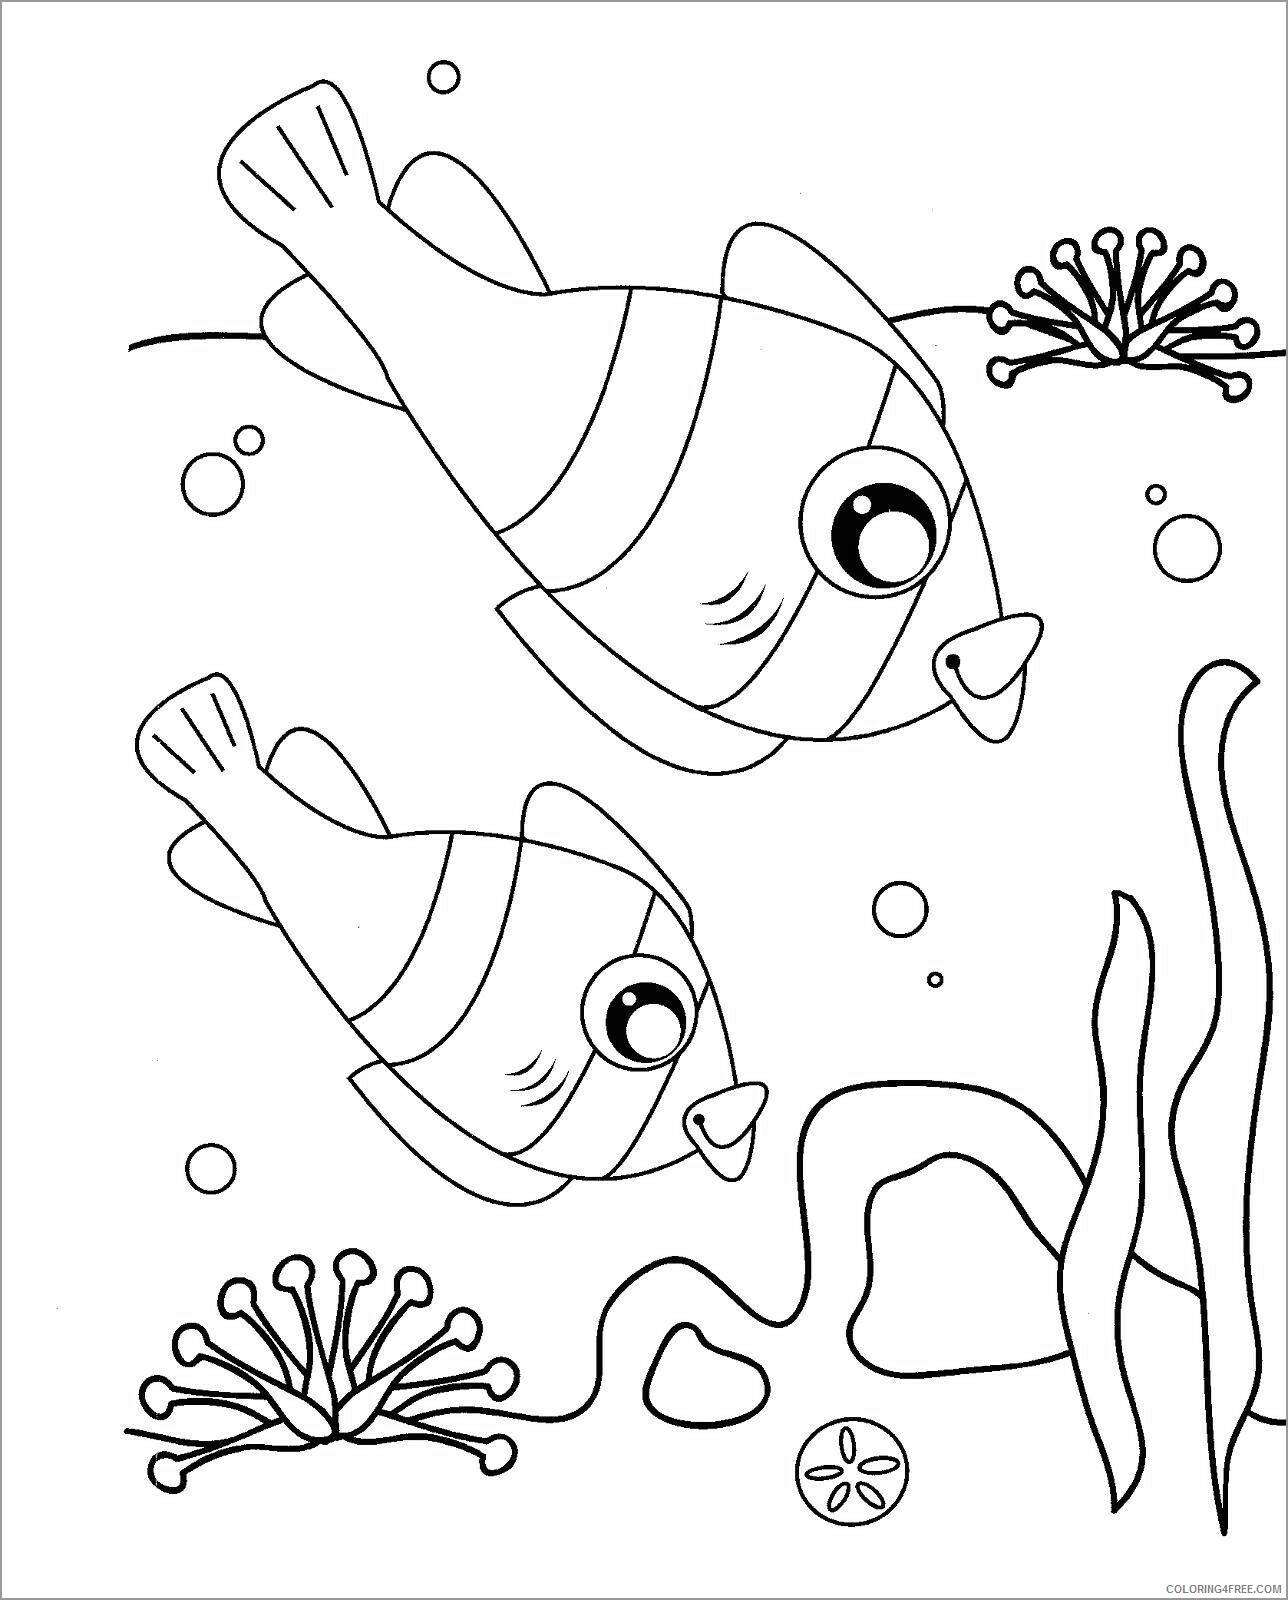 Clownfish Coloring Pages Animal Printable Sheets printable clownfish 2021 1102 Coloring4free